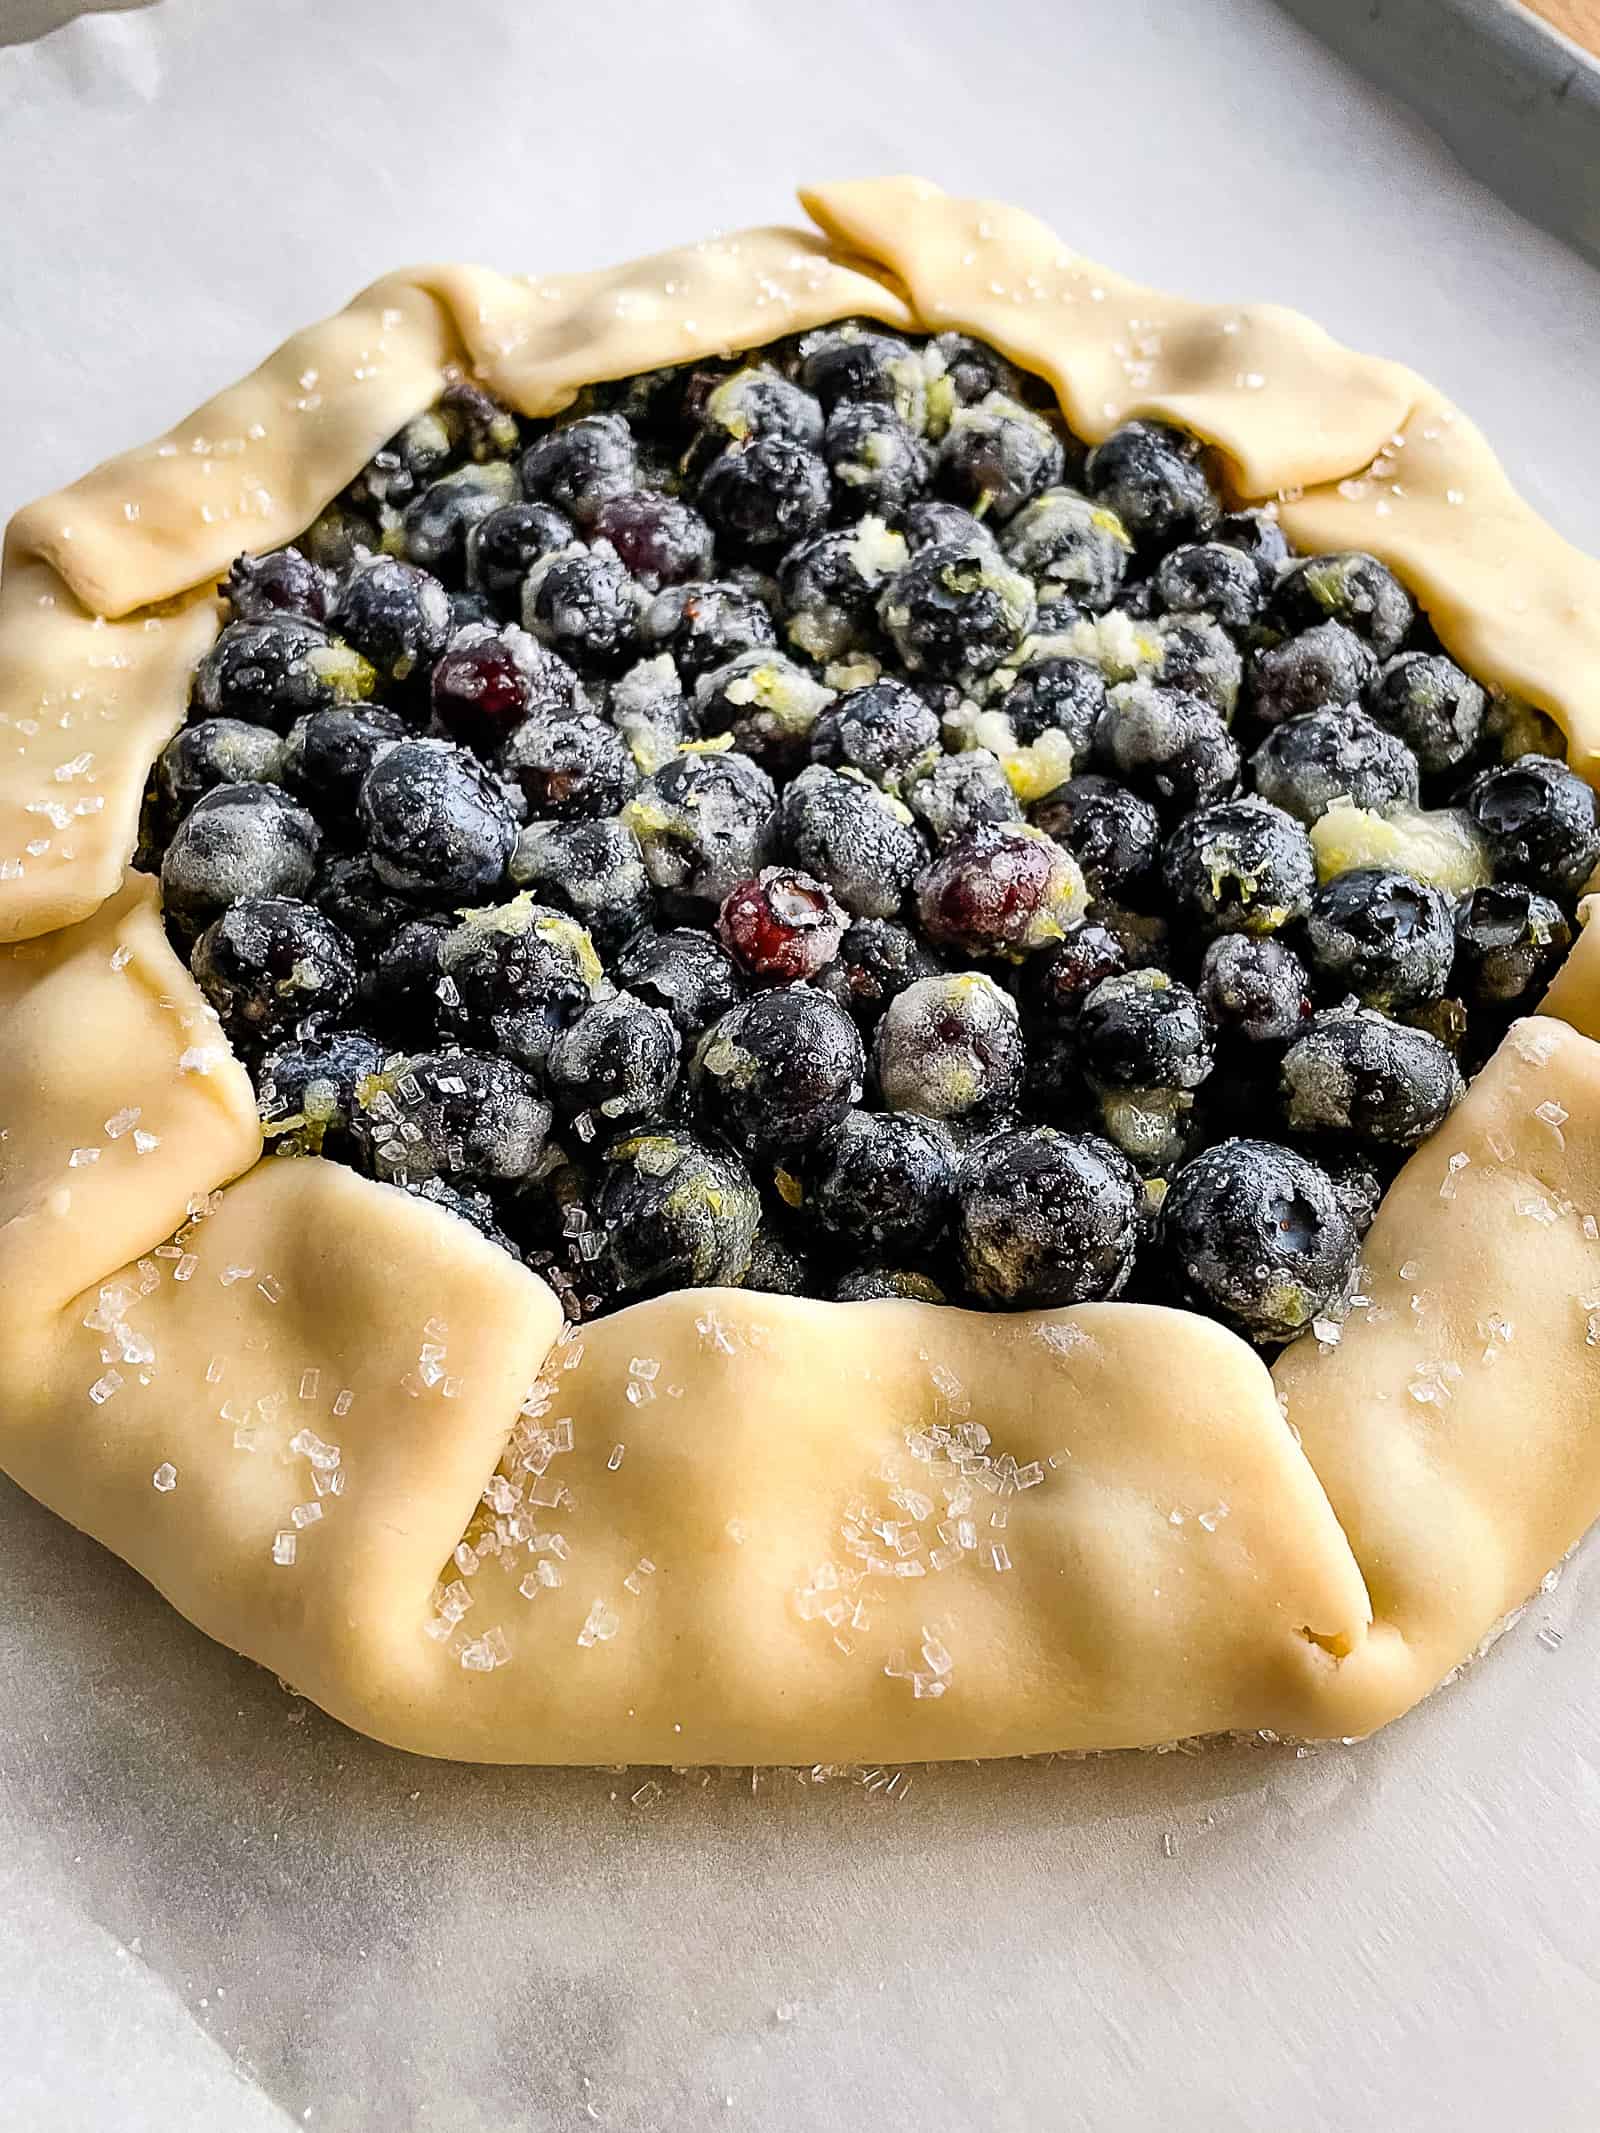 Unbaked blueberry galette on a baking sheet.